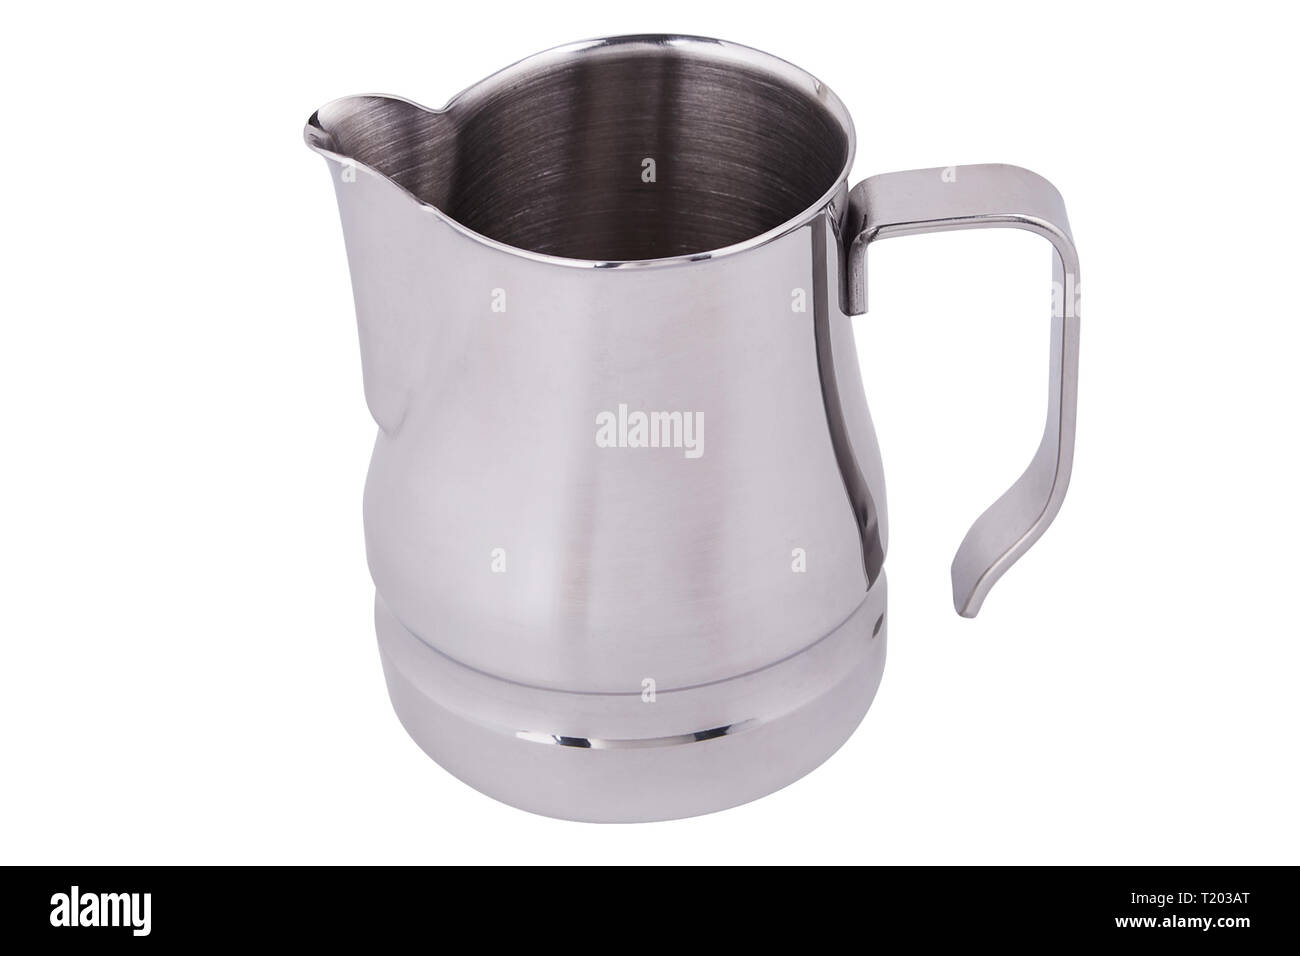 https://c8.alamy.com/comp/T203AT/stainless-steel-milk-pitcherjug-foaming-jug-latte-art-for-barista-coffee-accessories-barista-kit-isolated-on-white-background-T203AT.jpg